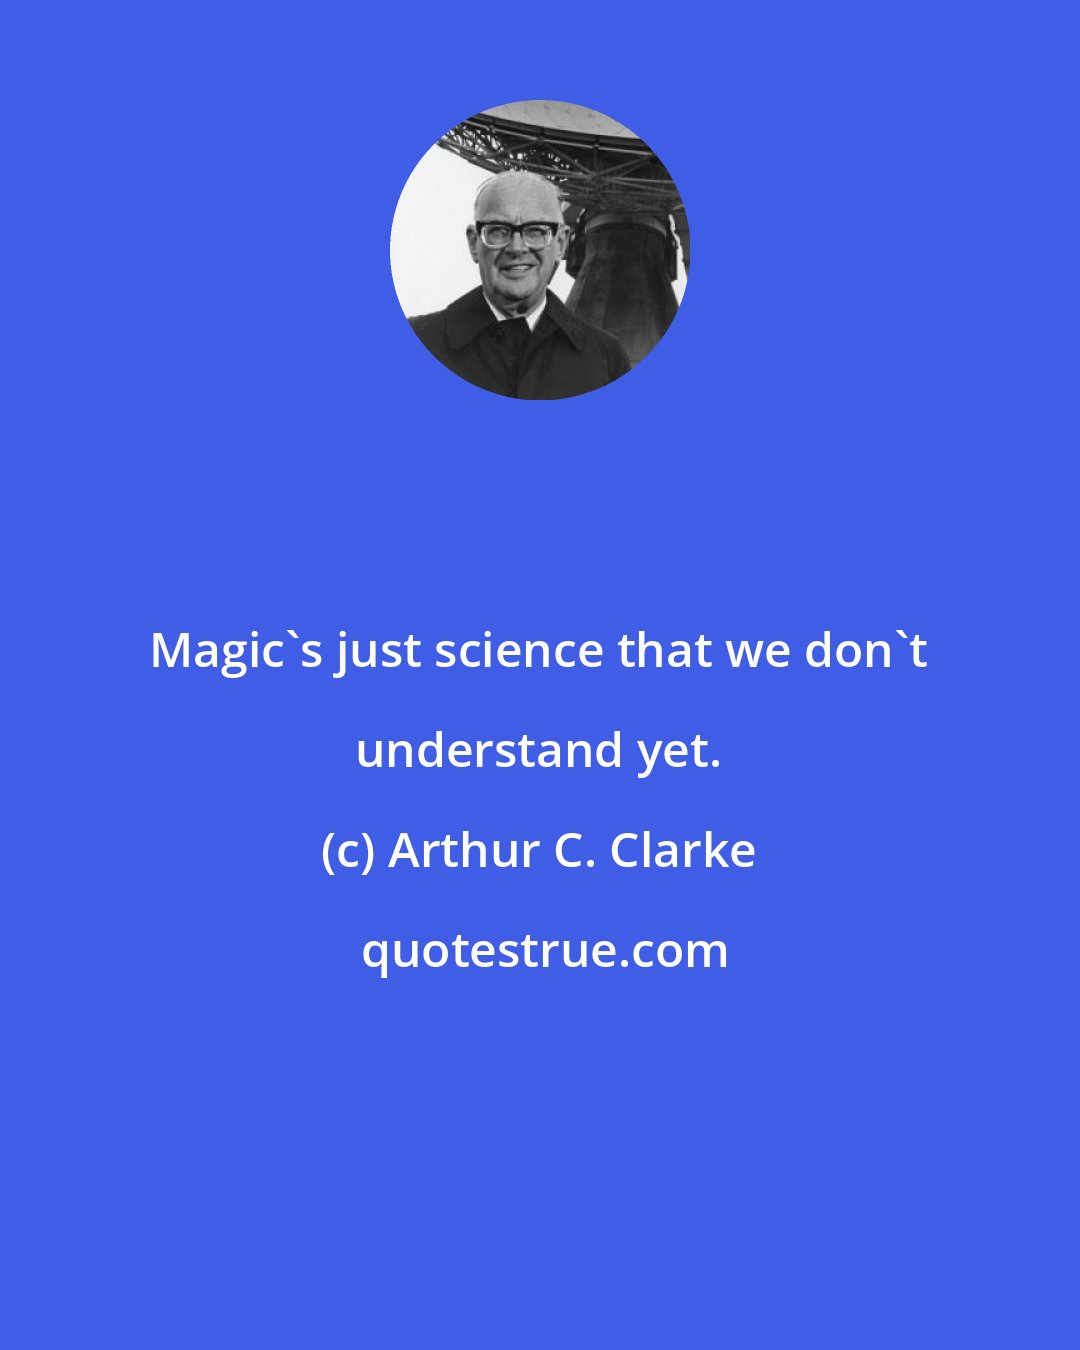 Arthur C. Clarke: Magic's just science that we don't understand yet.